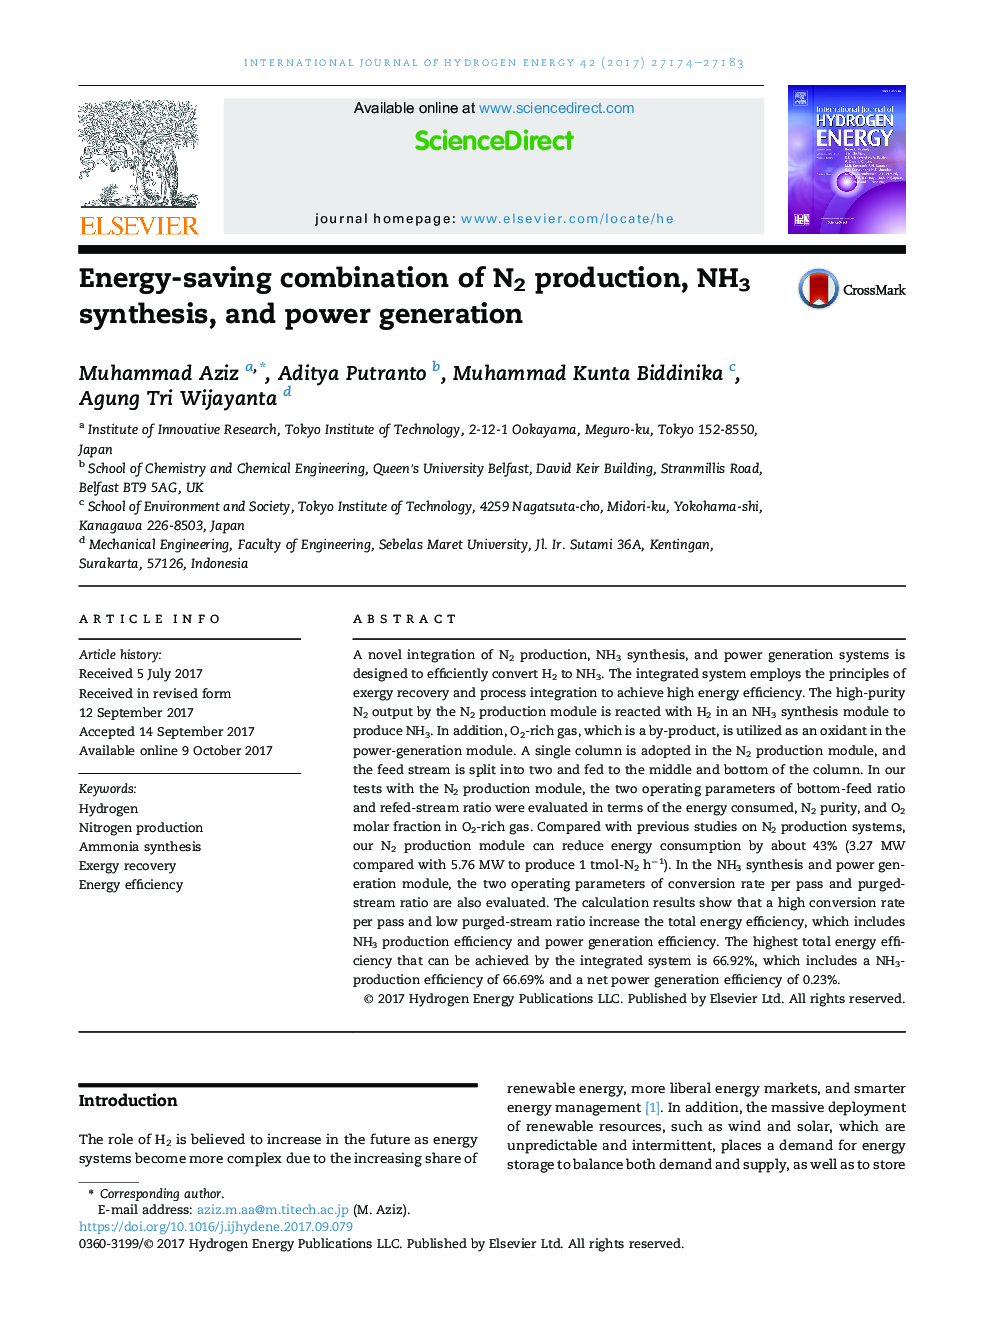 Energy-saving combination of N2 production, NH3 synthesis, and power generation